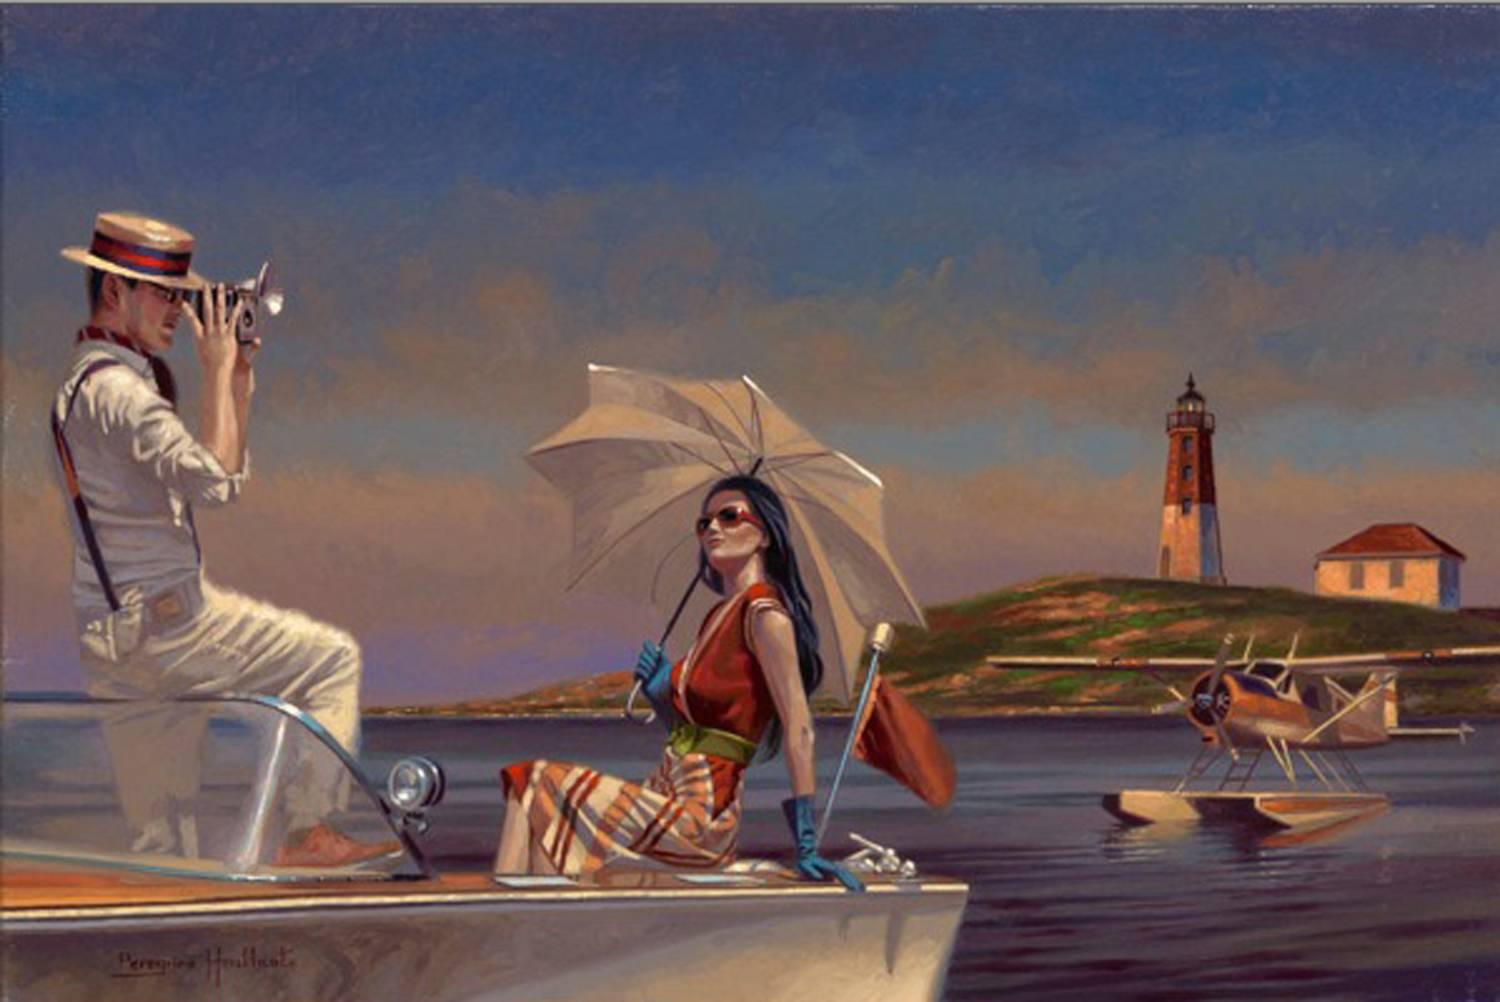 Peregrine Heathcote Figurative Painting - Time To Take Our Time